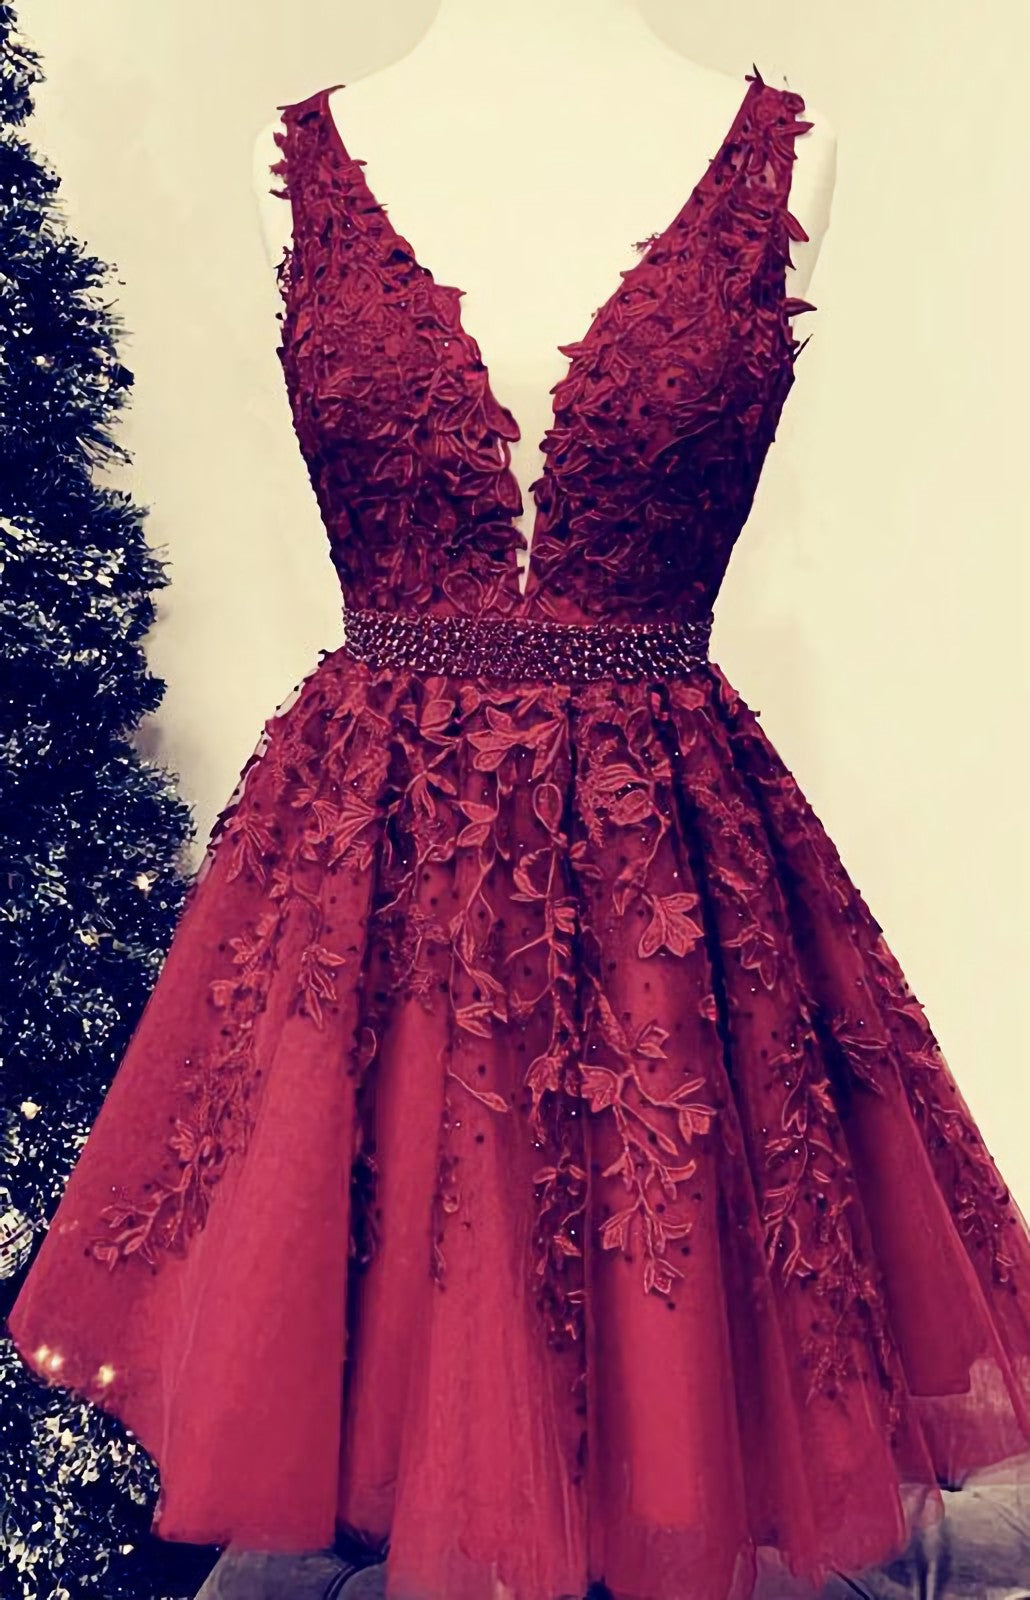 Tulle Homecoming Dresses, Burgundy Homecoming Dresses